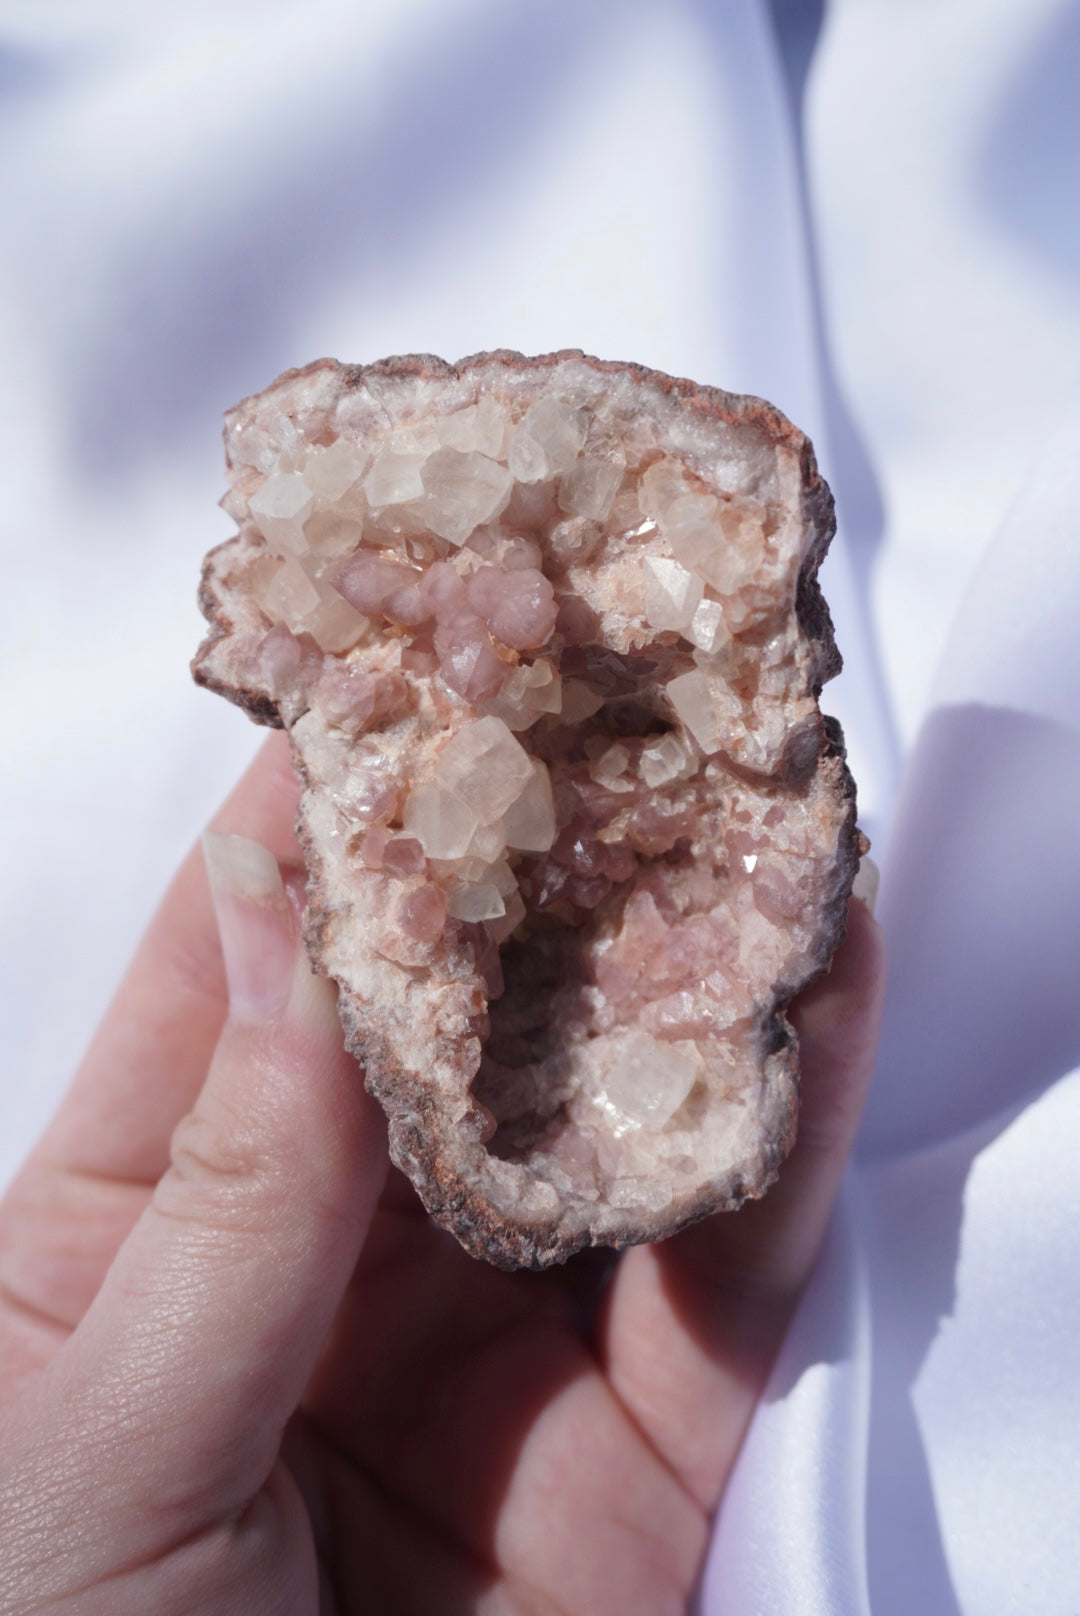 Pink Amethyst Geode With Calcite Inclusions